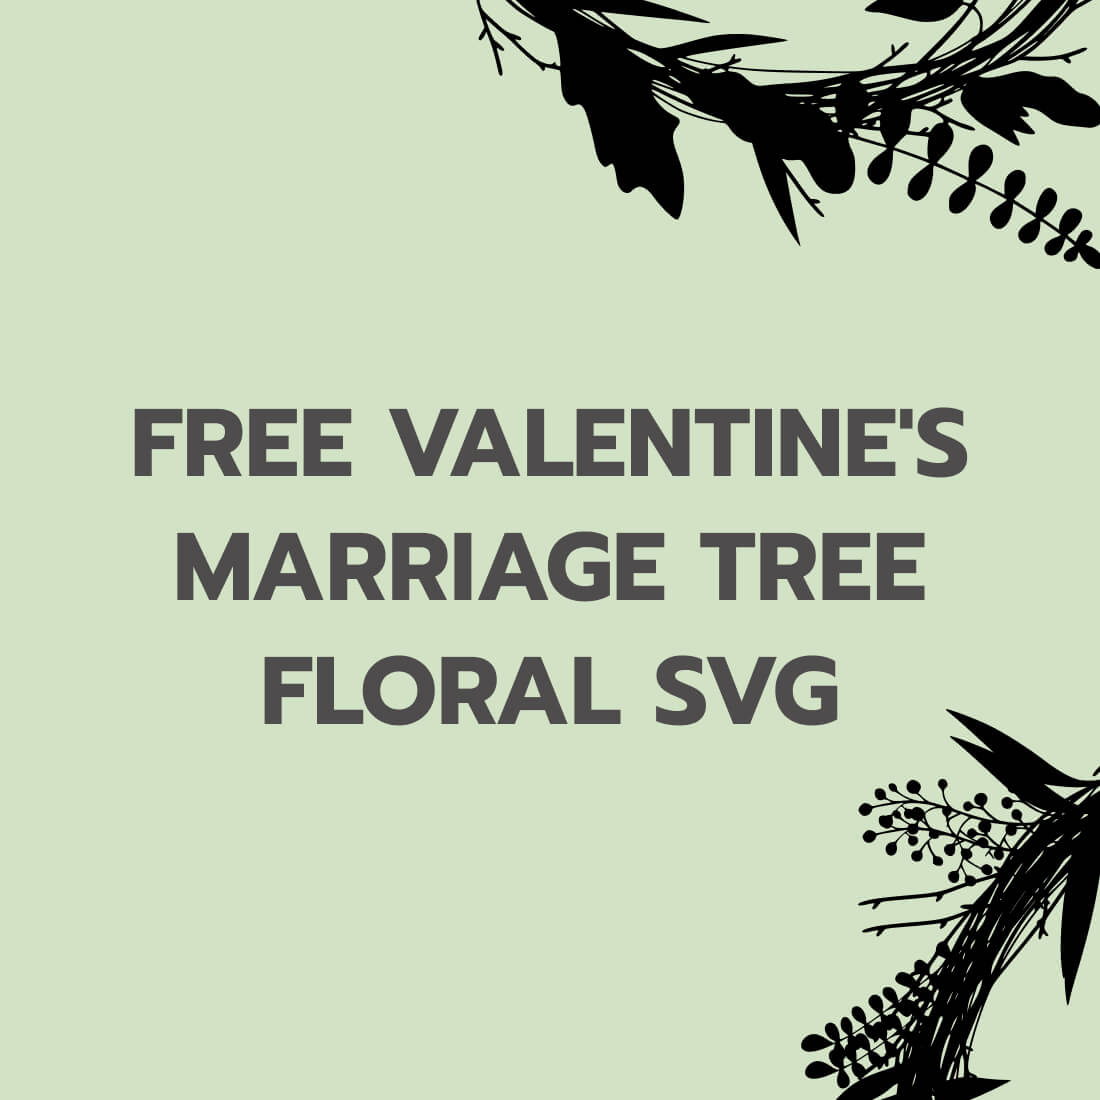 Free Valentine's Marriage Tree Floral SVG preview.